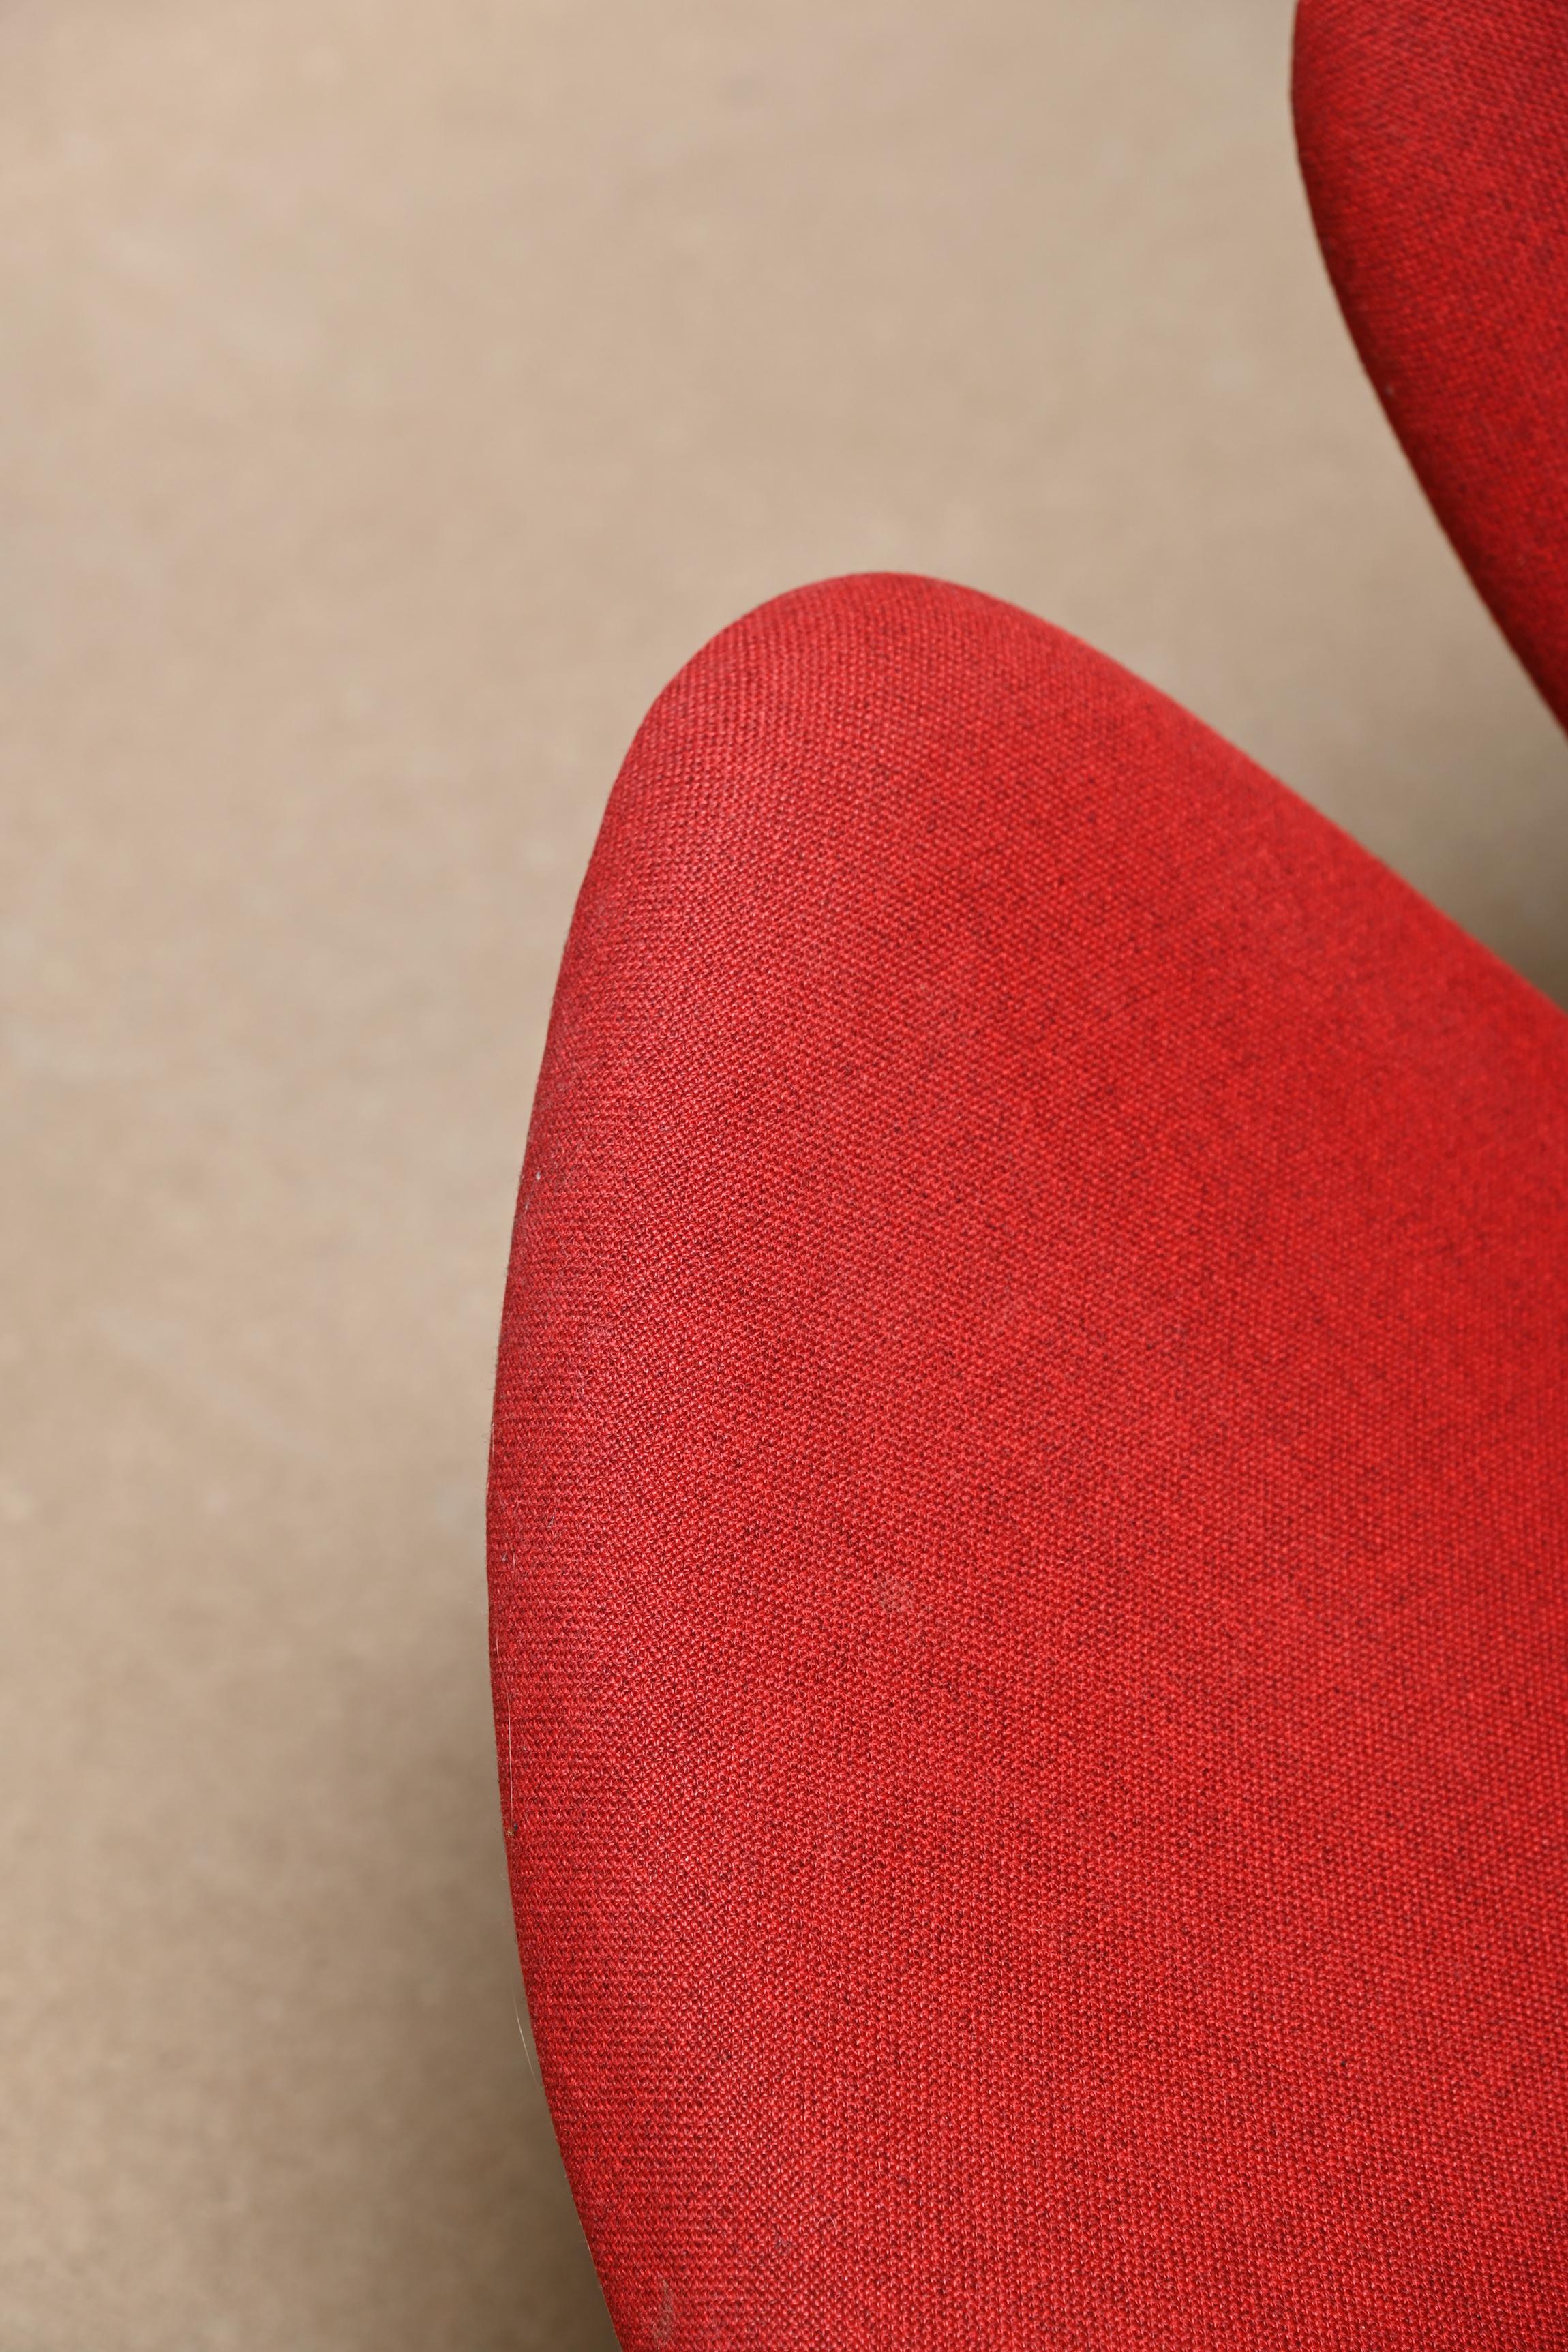 Early Pierre Paulin 'Orange Slice' Chair in Red Fabric by Artifort, Netherlands For Sale 3